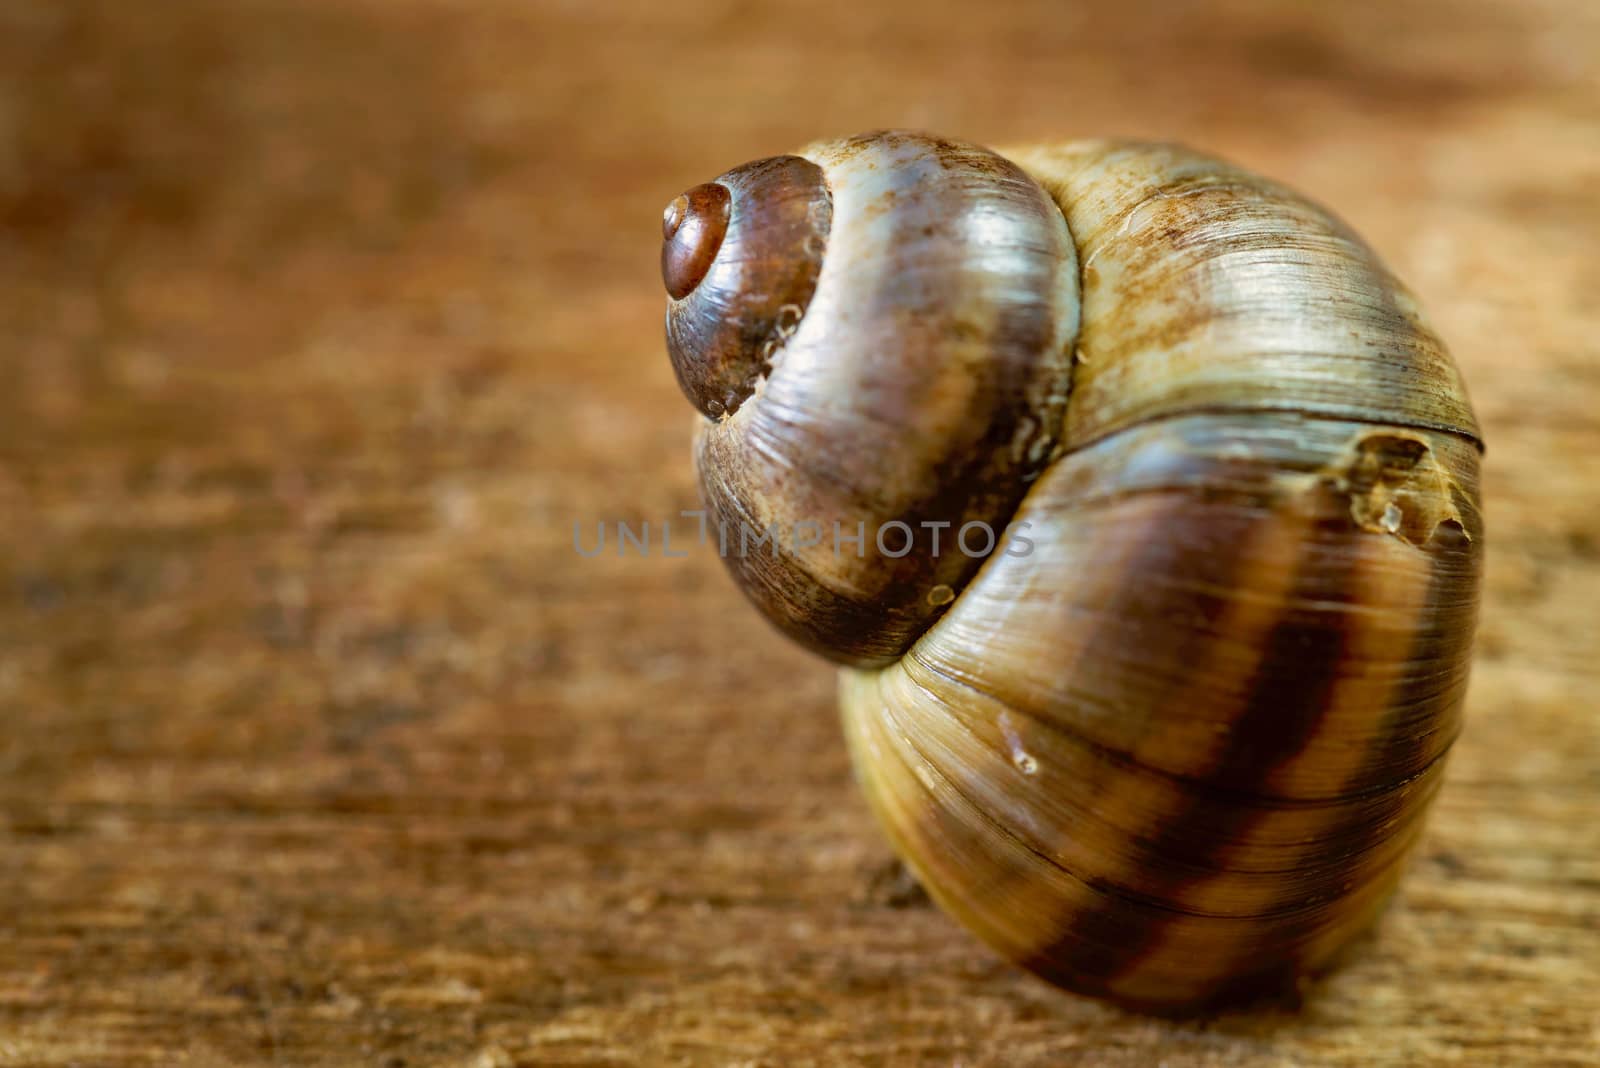 Common Periwinkle on a Wooden Background by MaxalTamor